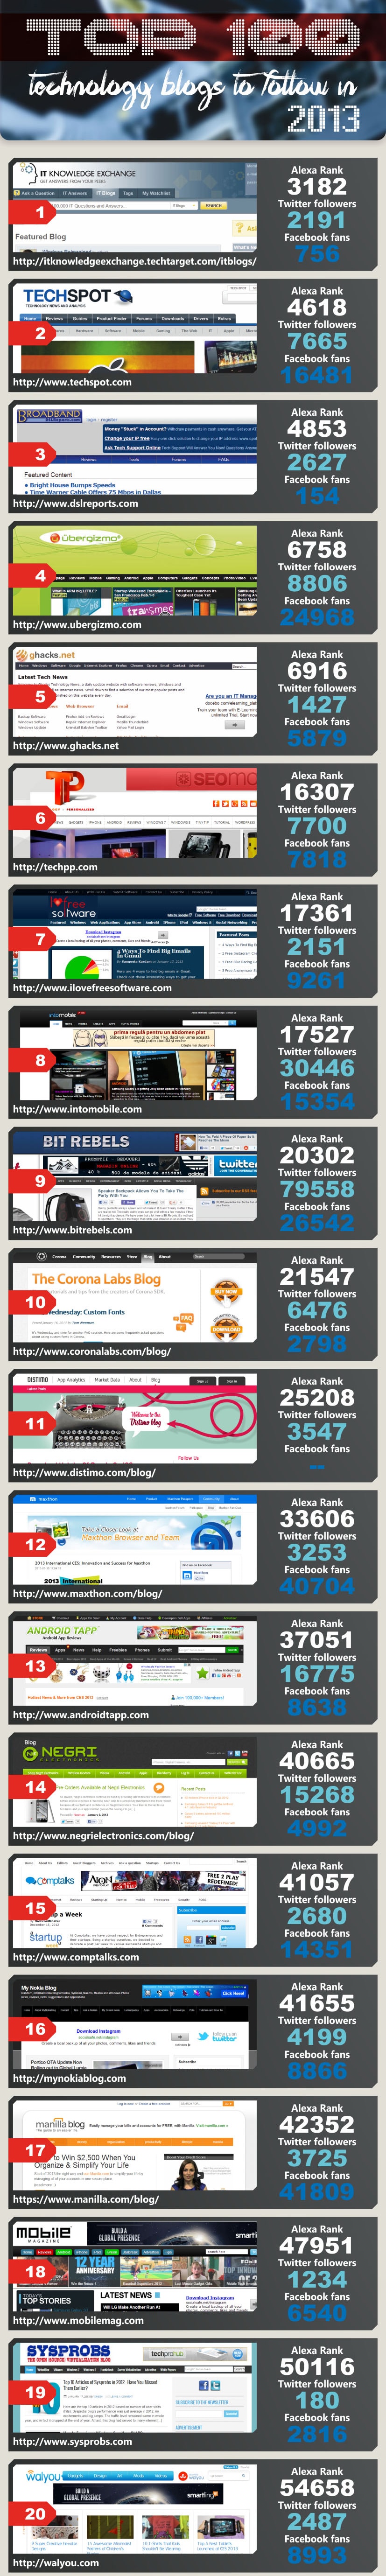 100 Top Technology Blogs To Follow In 2013 [Infographic]